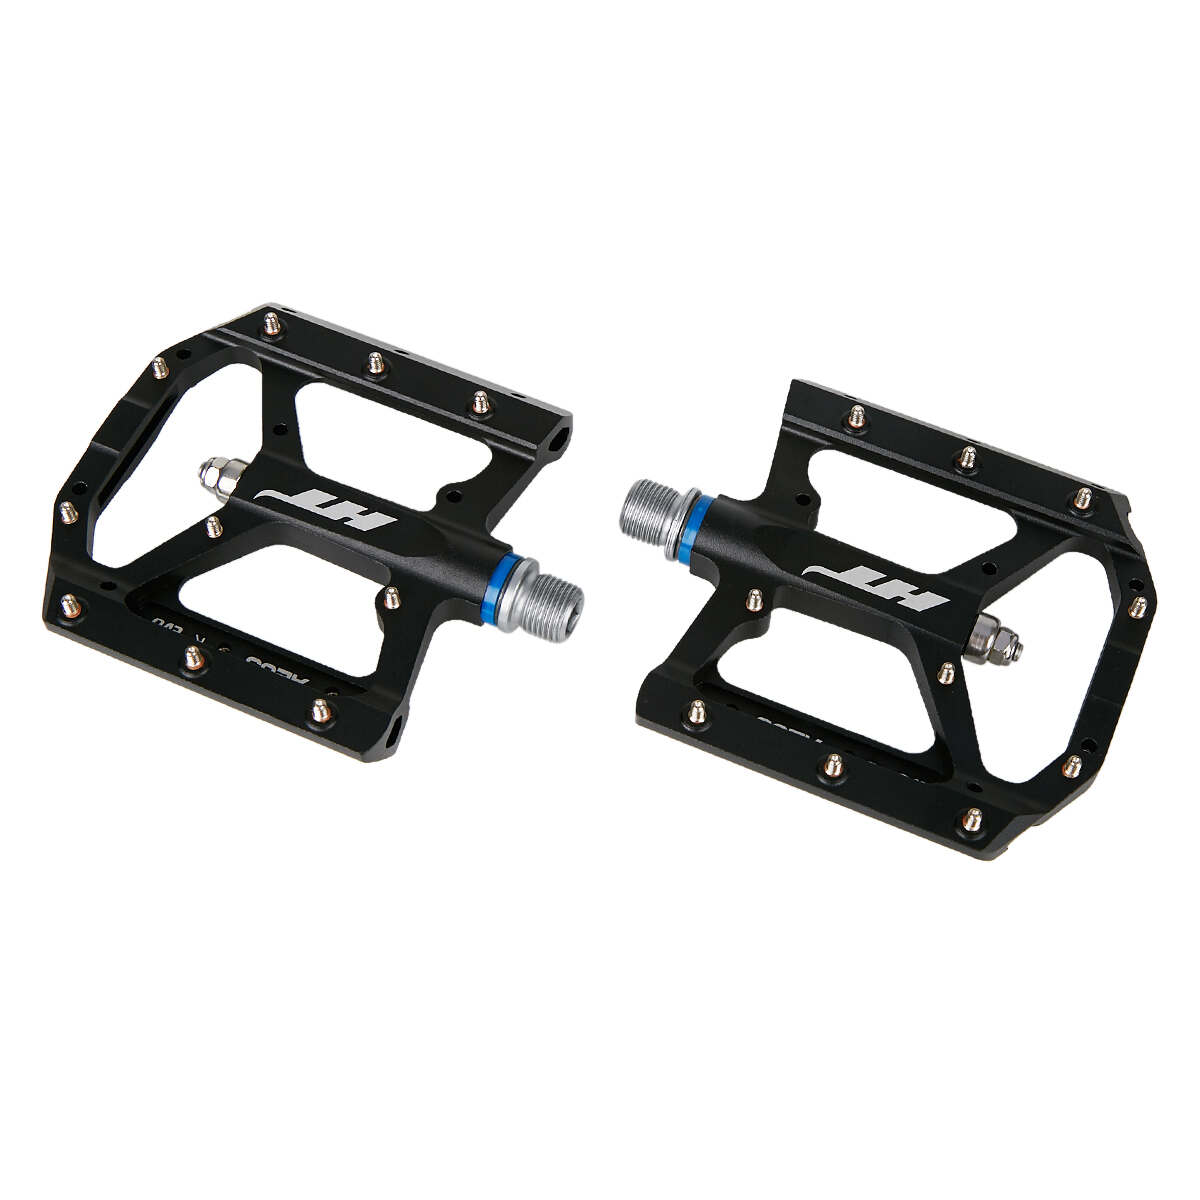 HT Components Pedals AE05 Black